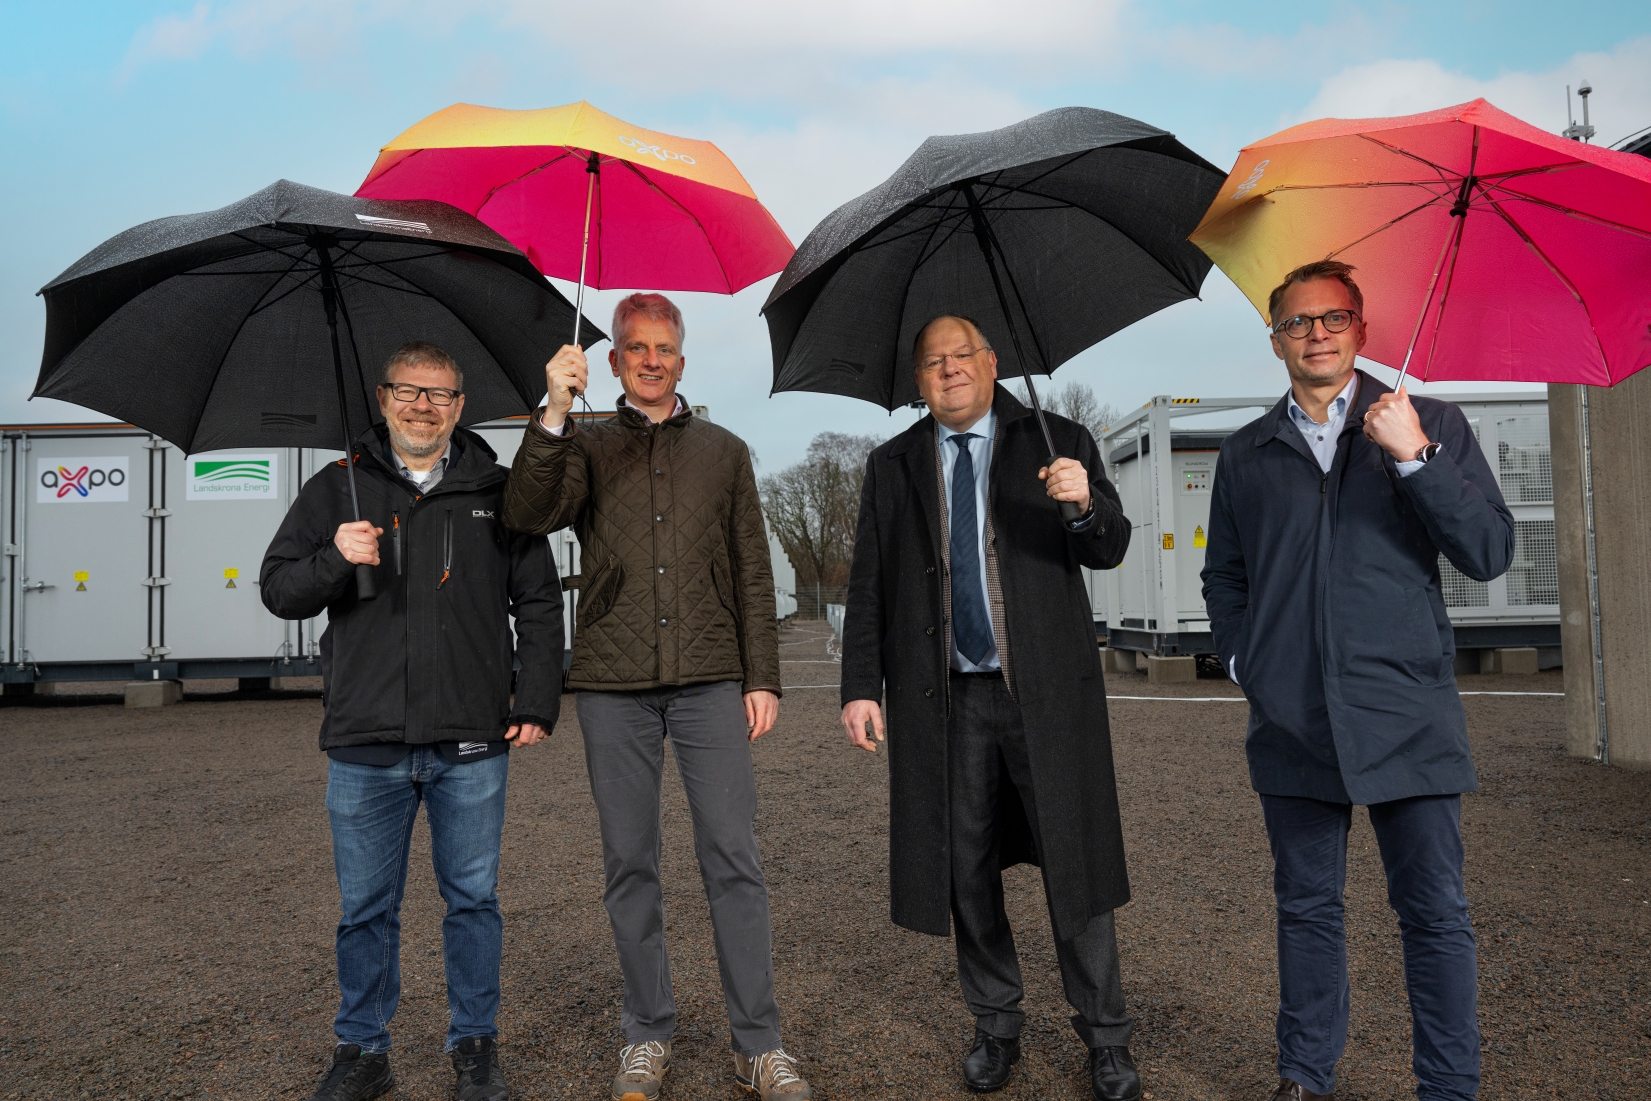 Opening event of the large battery storage facility on 12 February 2024: Johan Holmstedt, CEO Landskrona Energi; Frank Amend, Axpo Group, Head of Batteries & Hybrid Systems; Torkild Strandberg, chairman of the municipal council in the city of Landskrona; Håkon Røhne, Managing Director Axpo Nordic